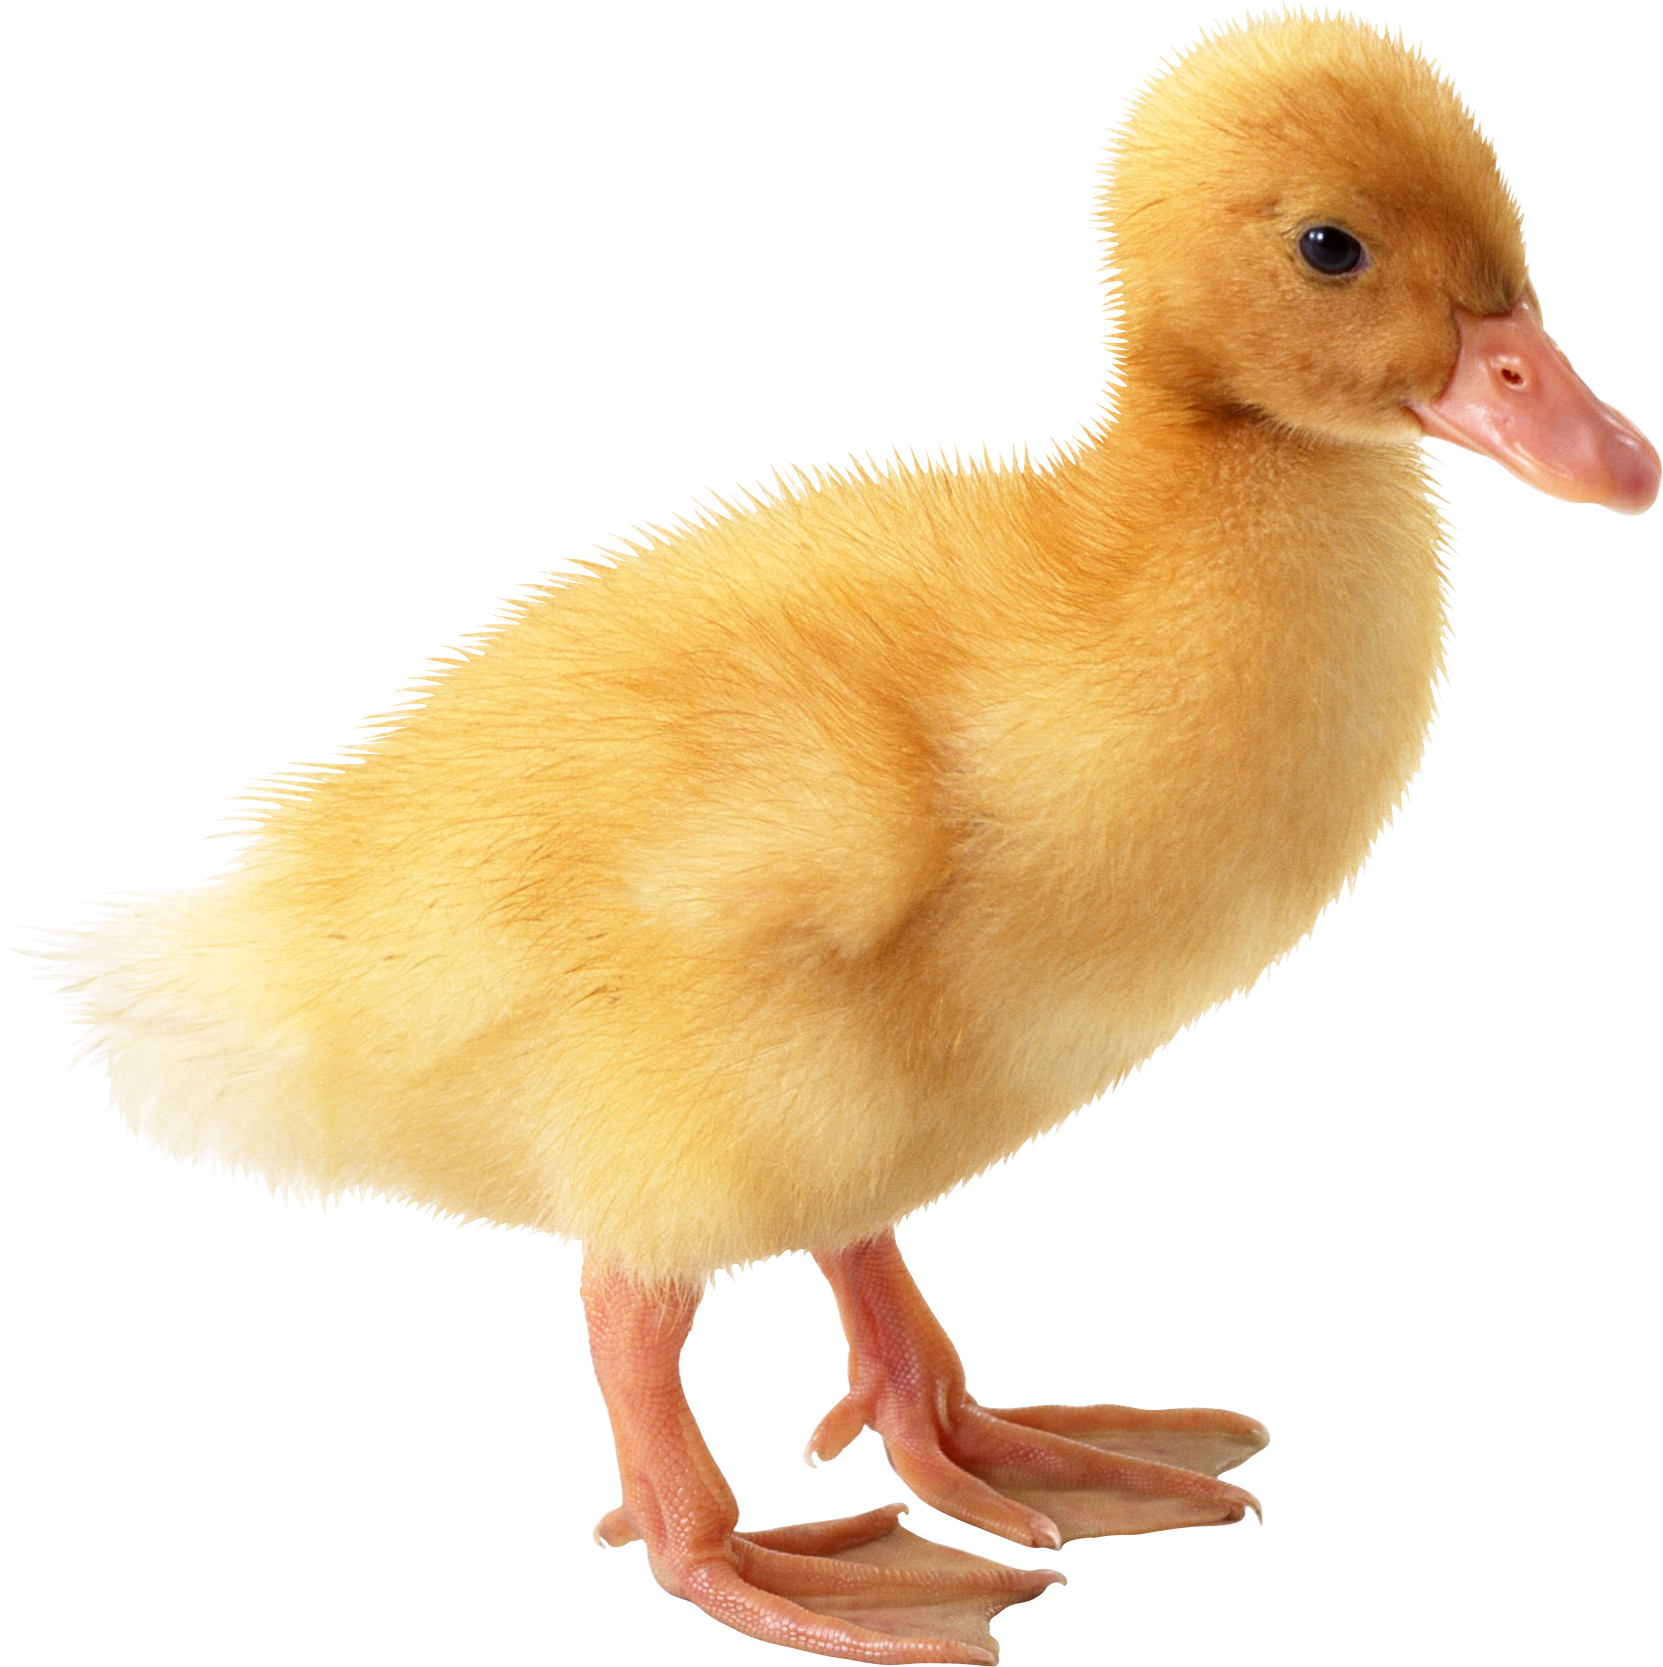 Duckling clipart christmas. Duck eleven isolated stock